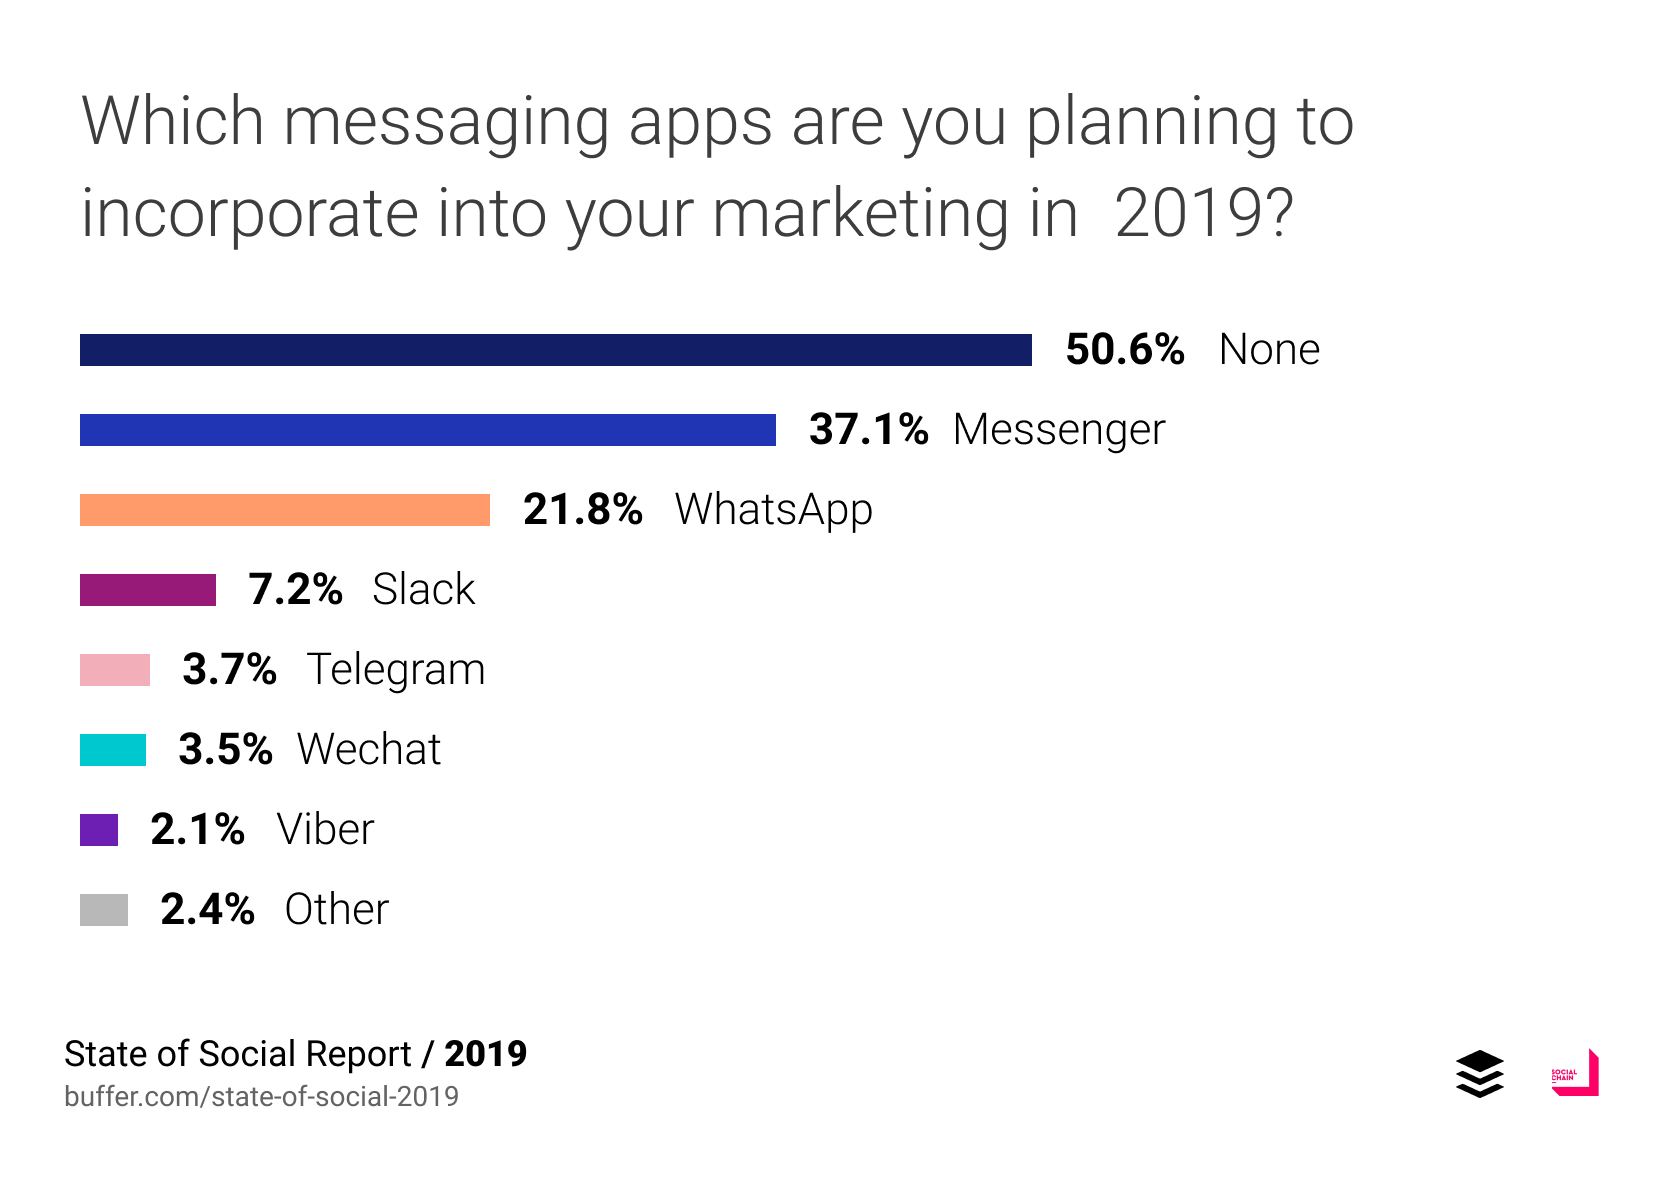 Which messaging apps are you planning to incoporate into your marketing in 2019?